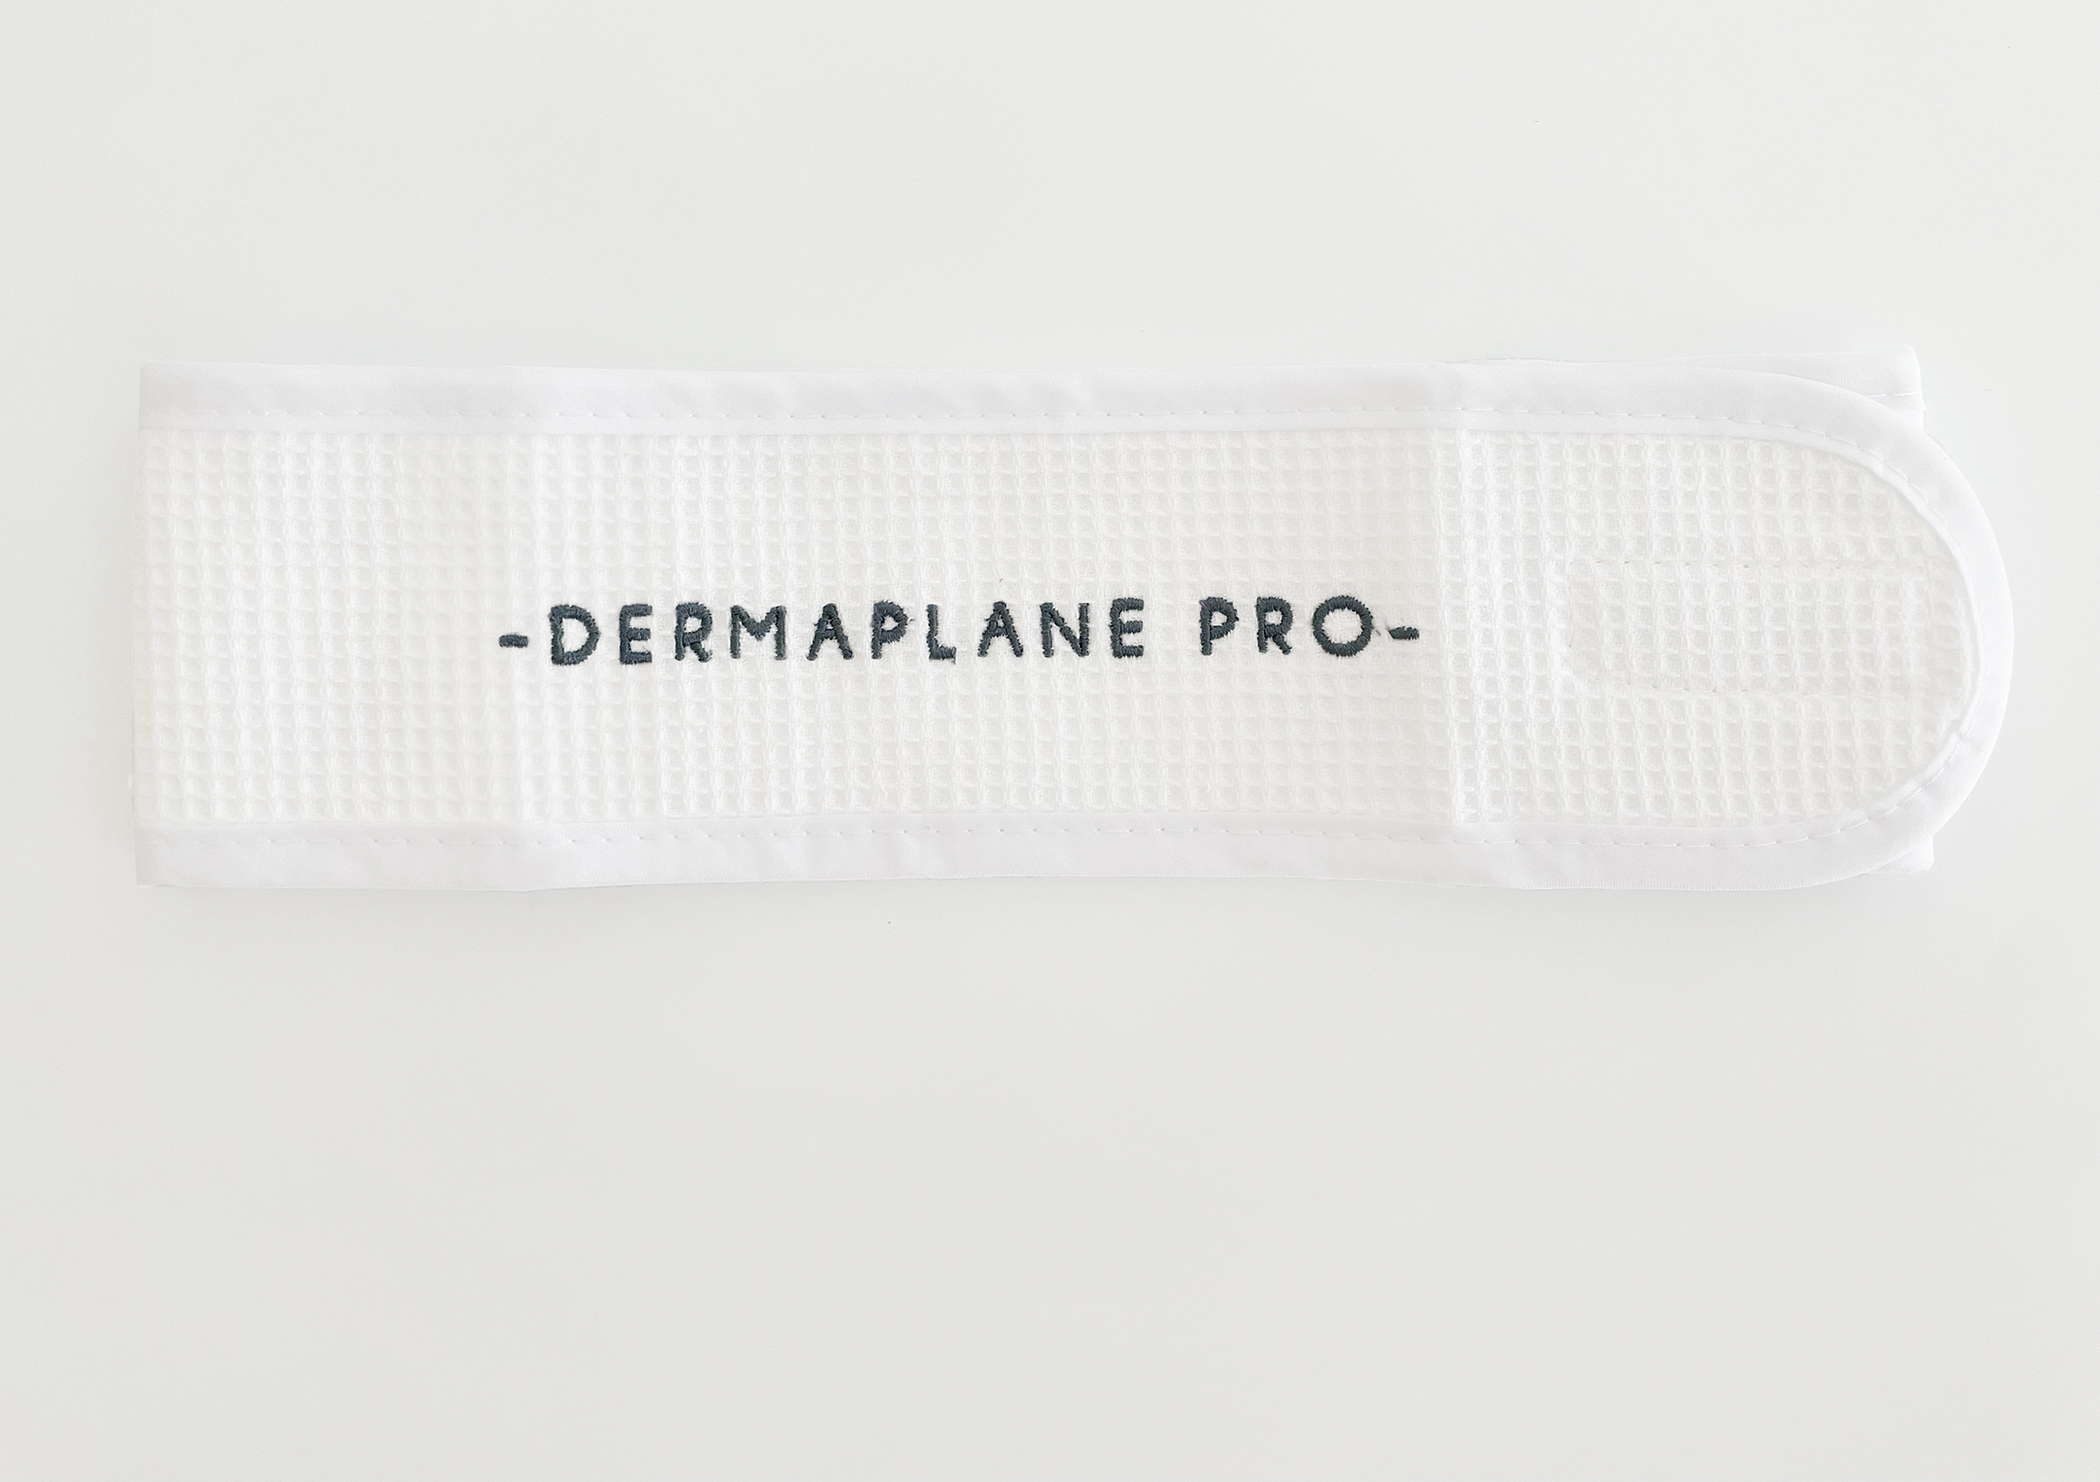 DermaplanePro waffleknit headwrap with velcro closure and navy blue logo on white fabric.